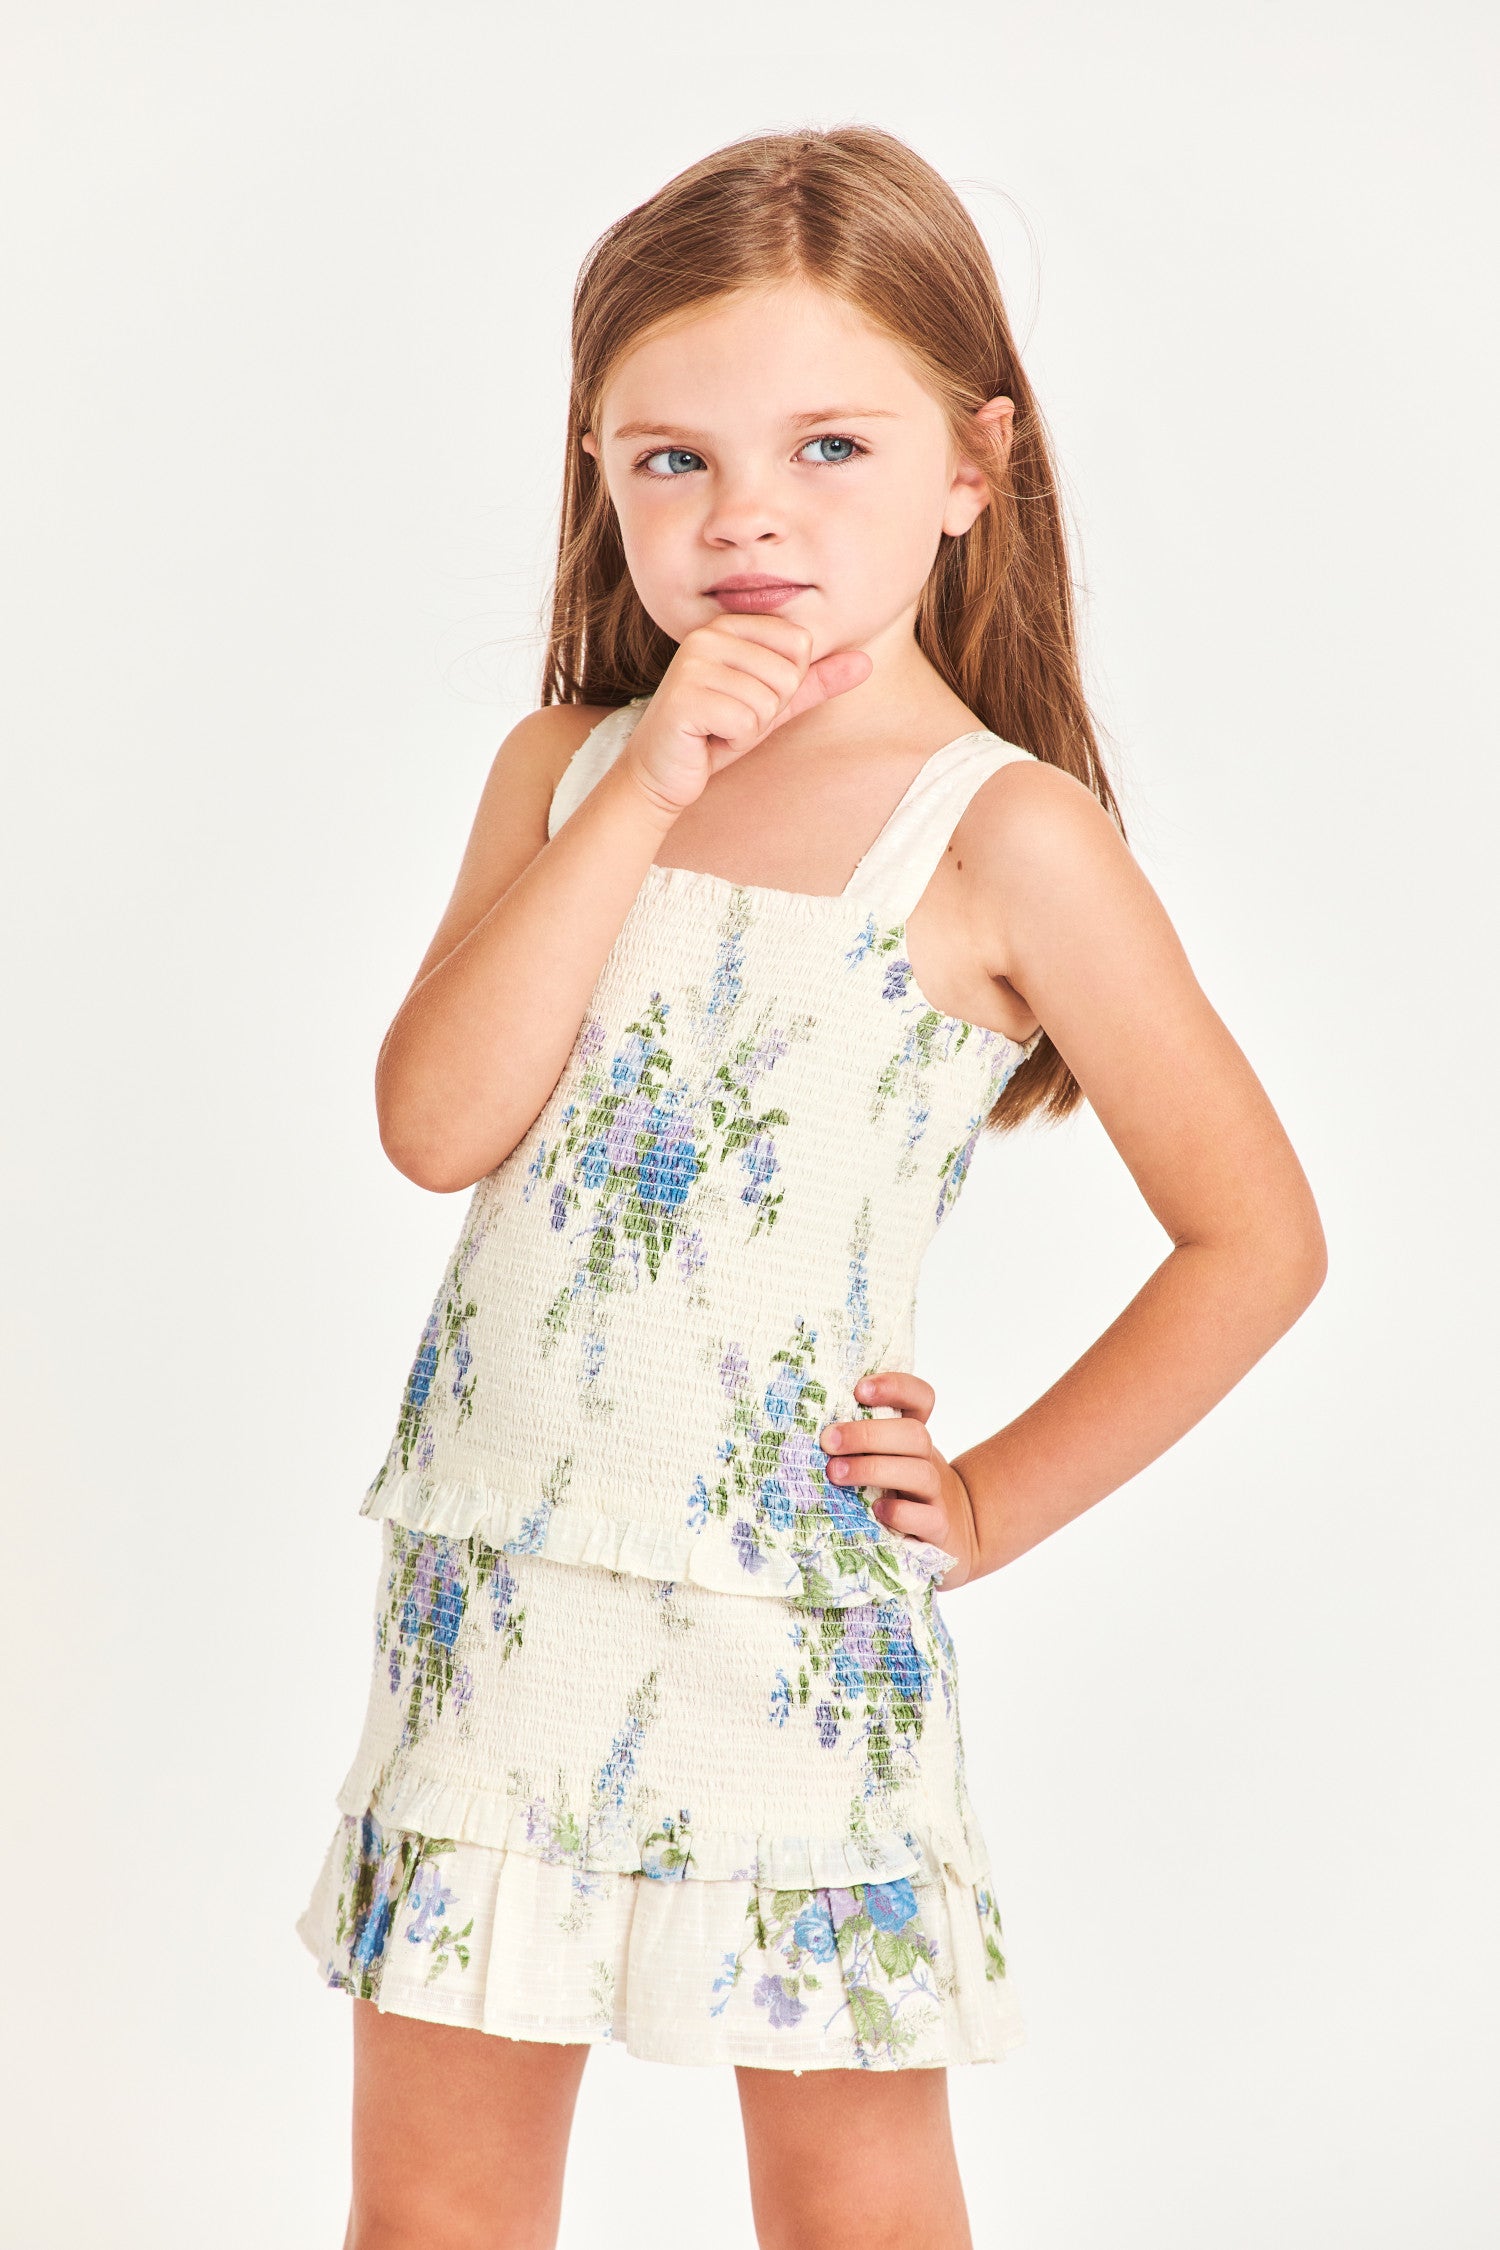 The girl’s Clancey dress is a white 100% cotton dress with blue flower detailing. It features a ruffled two-tier bottom and waistband. 